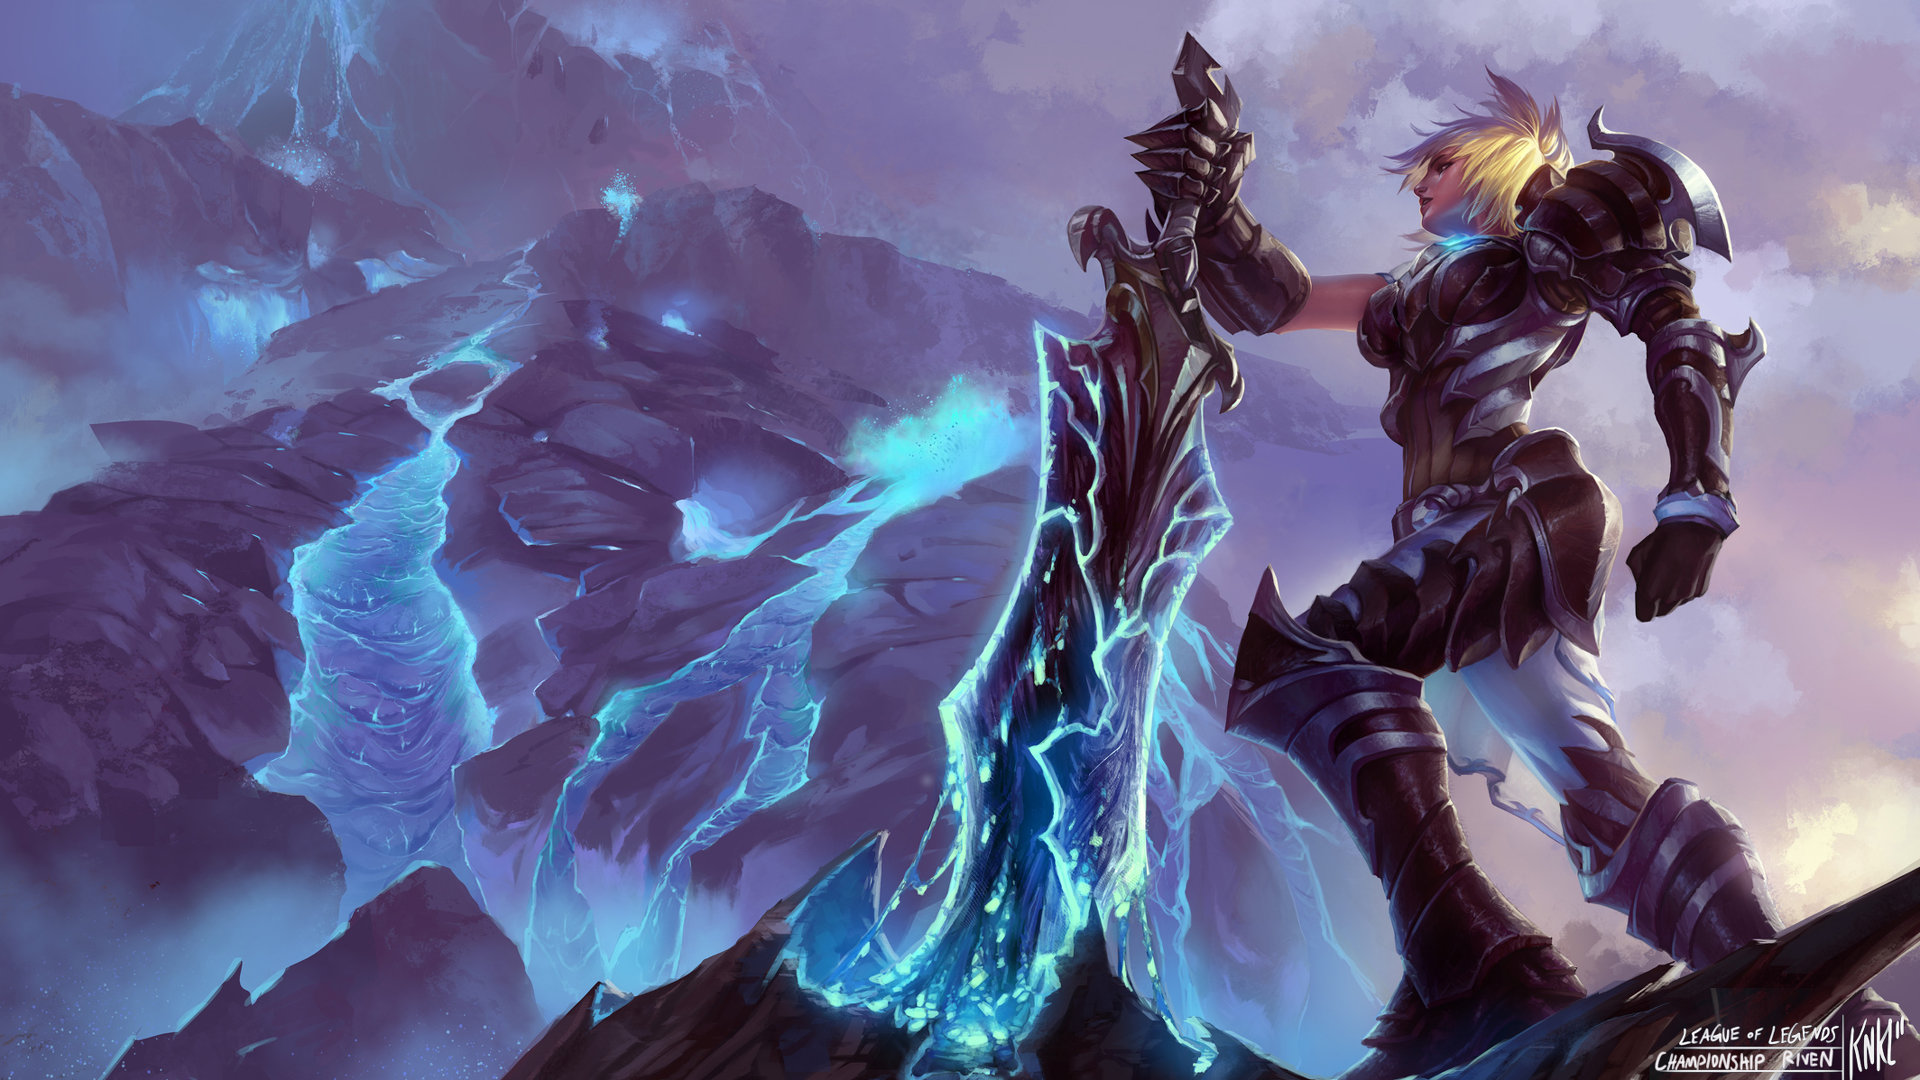 Download full hd 1920x1080 Riven (League Of Legends) desktop background ID:171787 for free